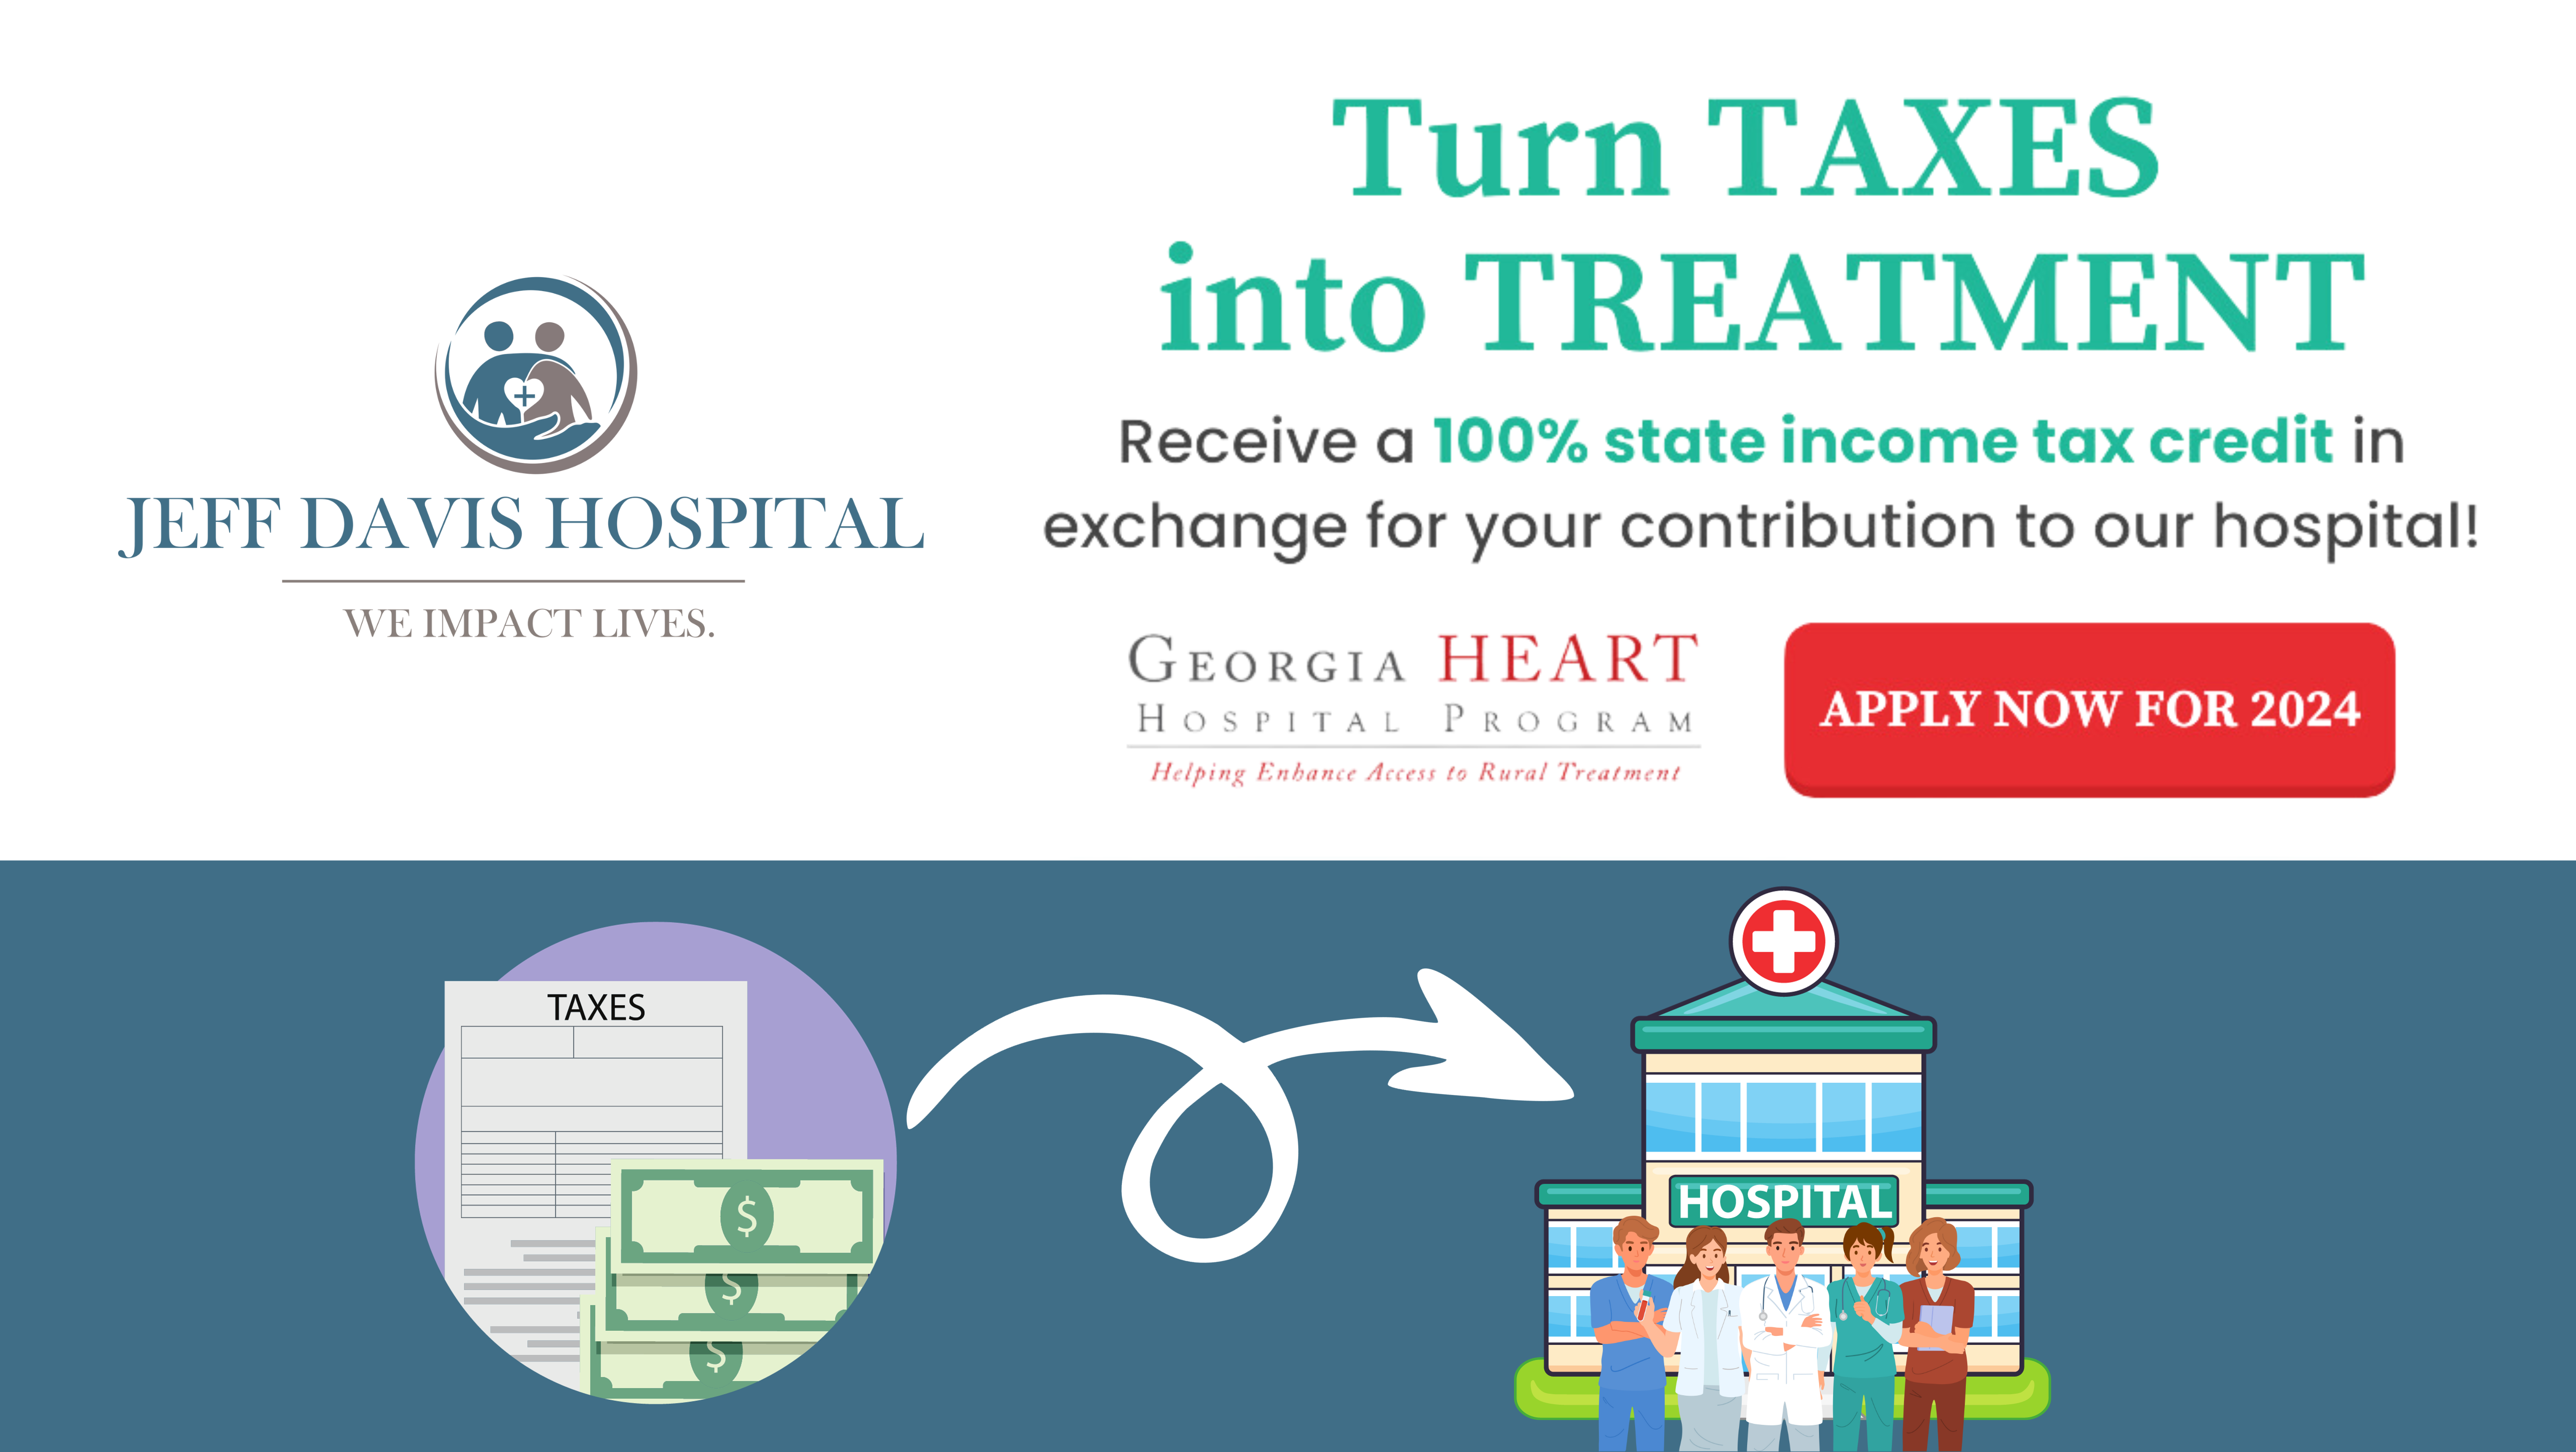 Turn taxes into treatment 
Receive a 100% state income tax credit in exchange for your contribution to our hospital!
Georgia Heart Hospital Program 
Helping Enhance Access to Rural Treatment 

Apply Now for 2024

JEFF DAVIS HOSPITAL 
We Impact Lives.